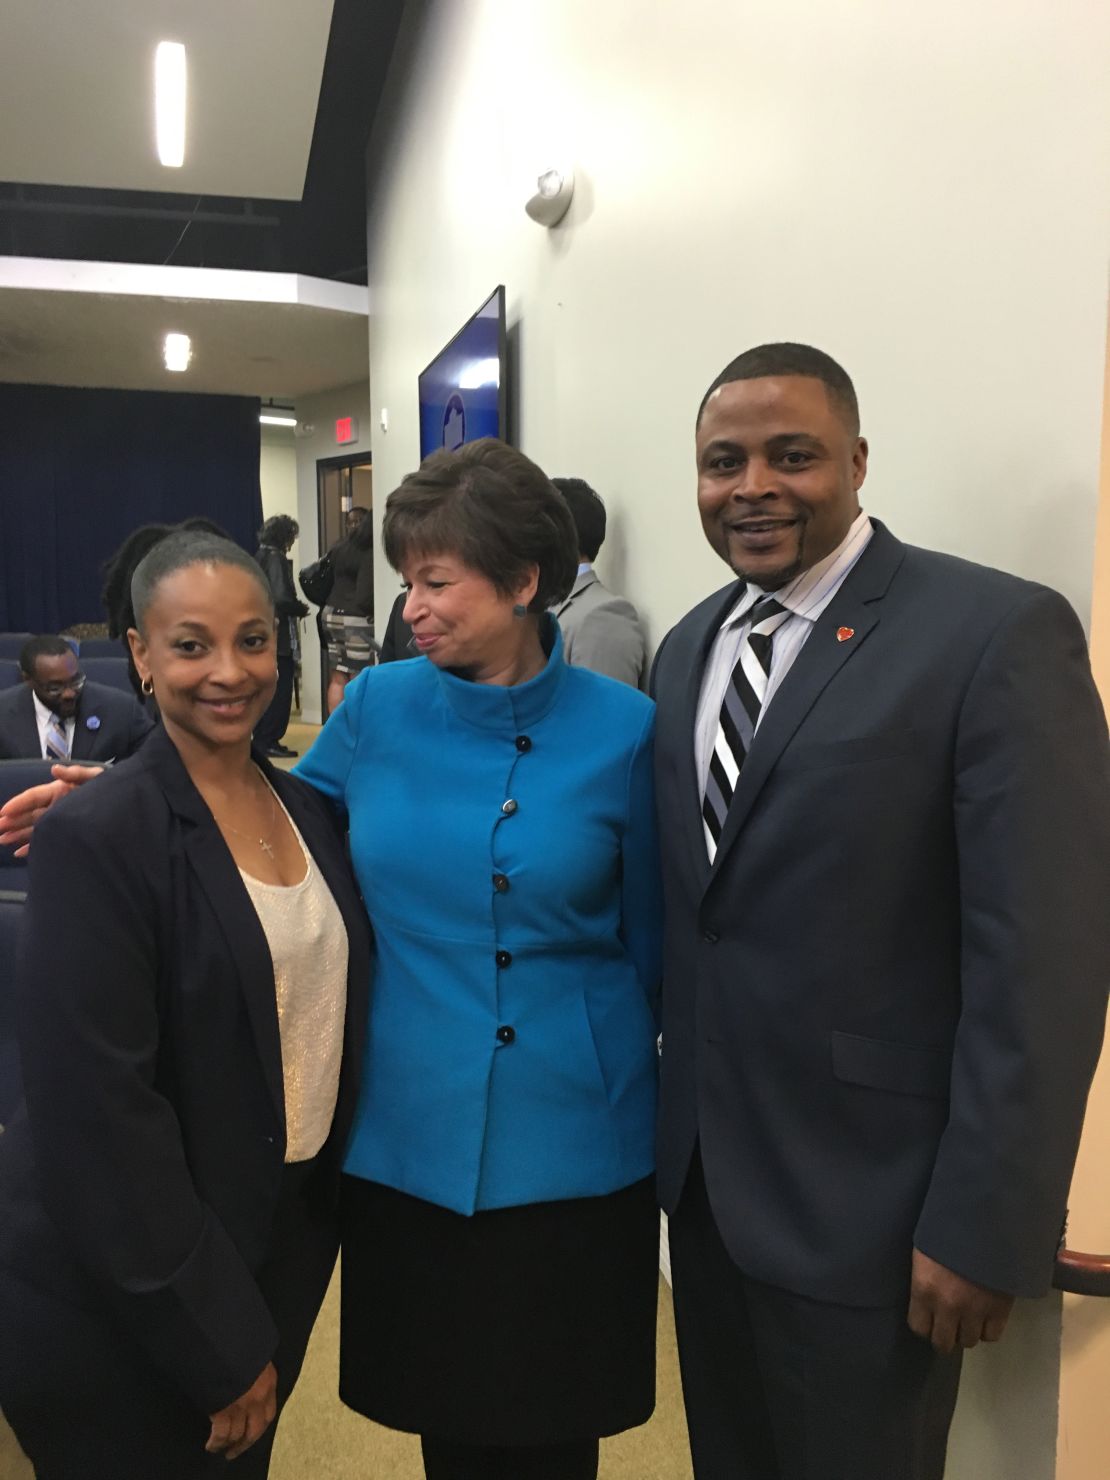 Sharanda Jones visits the White House to speak about criminal justice reform with Valerie Jarrett, Senior Advisor to President Barack Obama, while still under the control of the Bureau of Prisons. The two are pictured with Reynolds Wintersmith, another recipient of commutation.